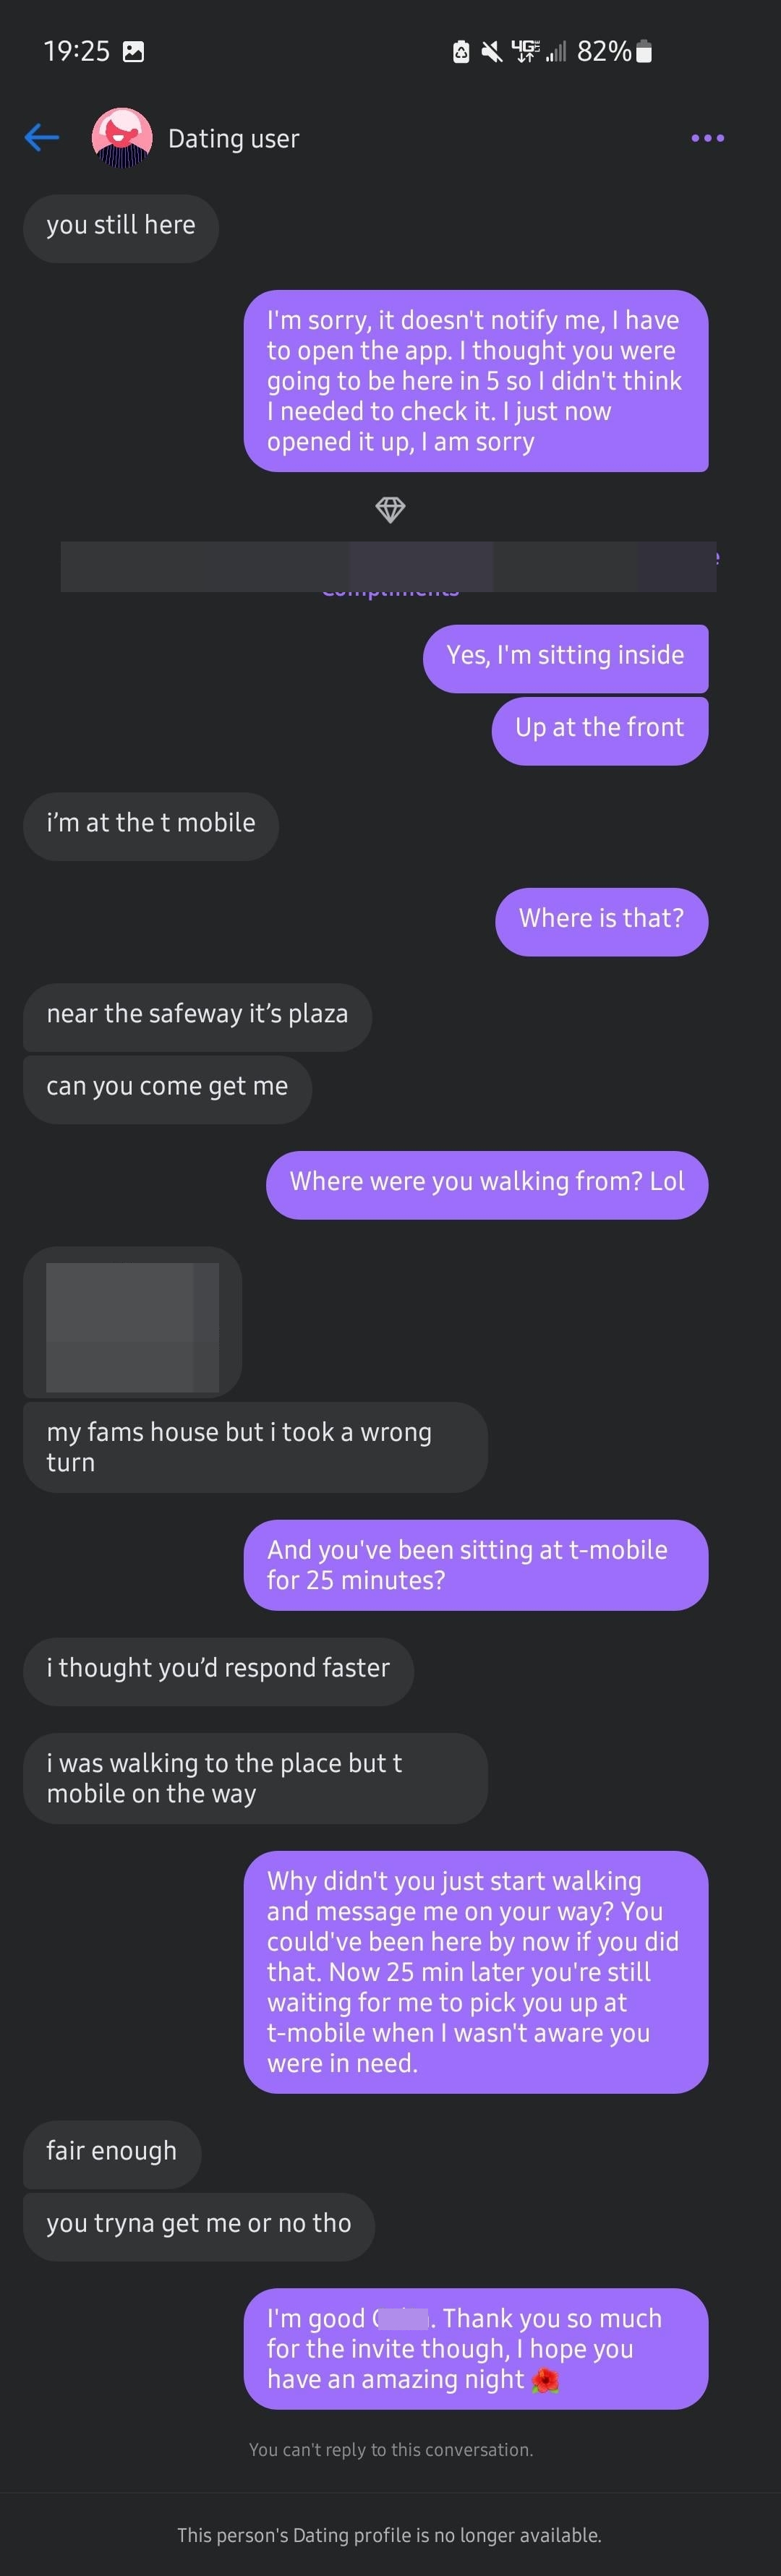 someone trying to get picked up at a t-mobile because they were walking to their date